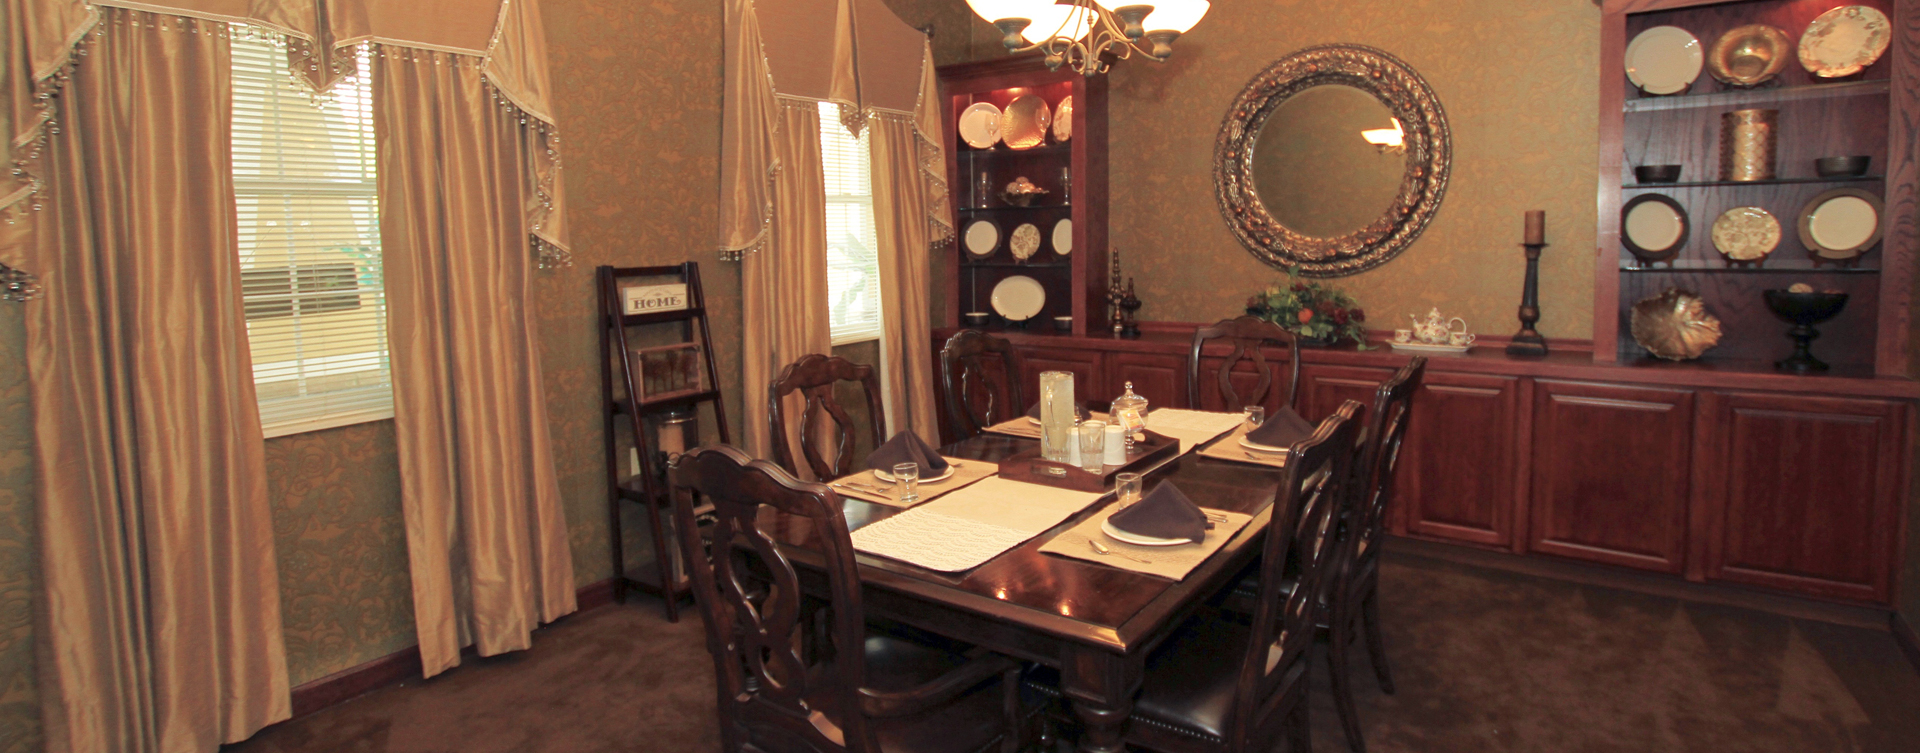 Food is best when shared with family and friends in the private dining room at Bickford of Saginaw Township